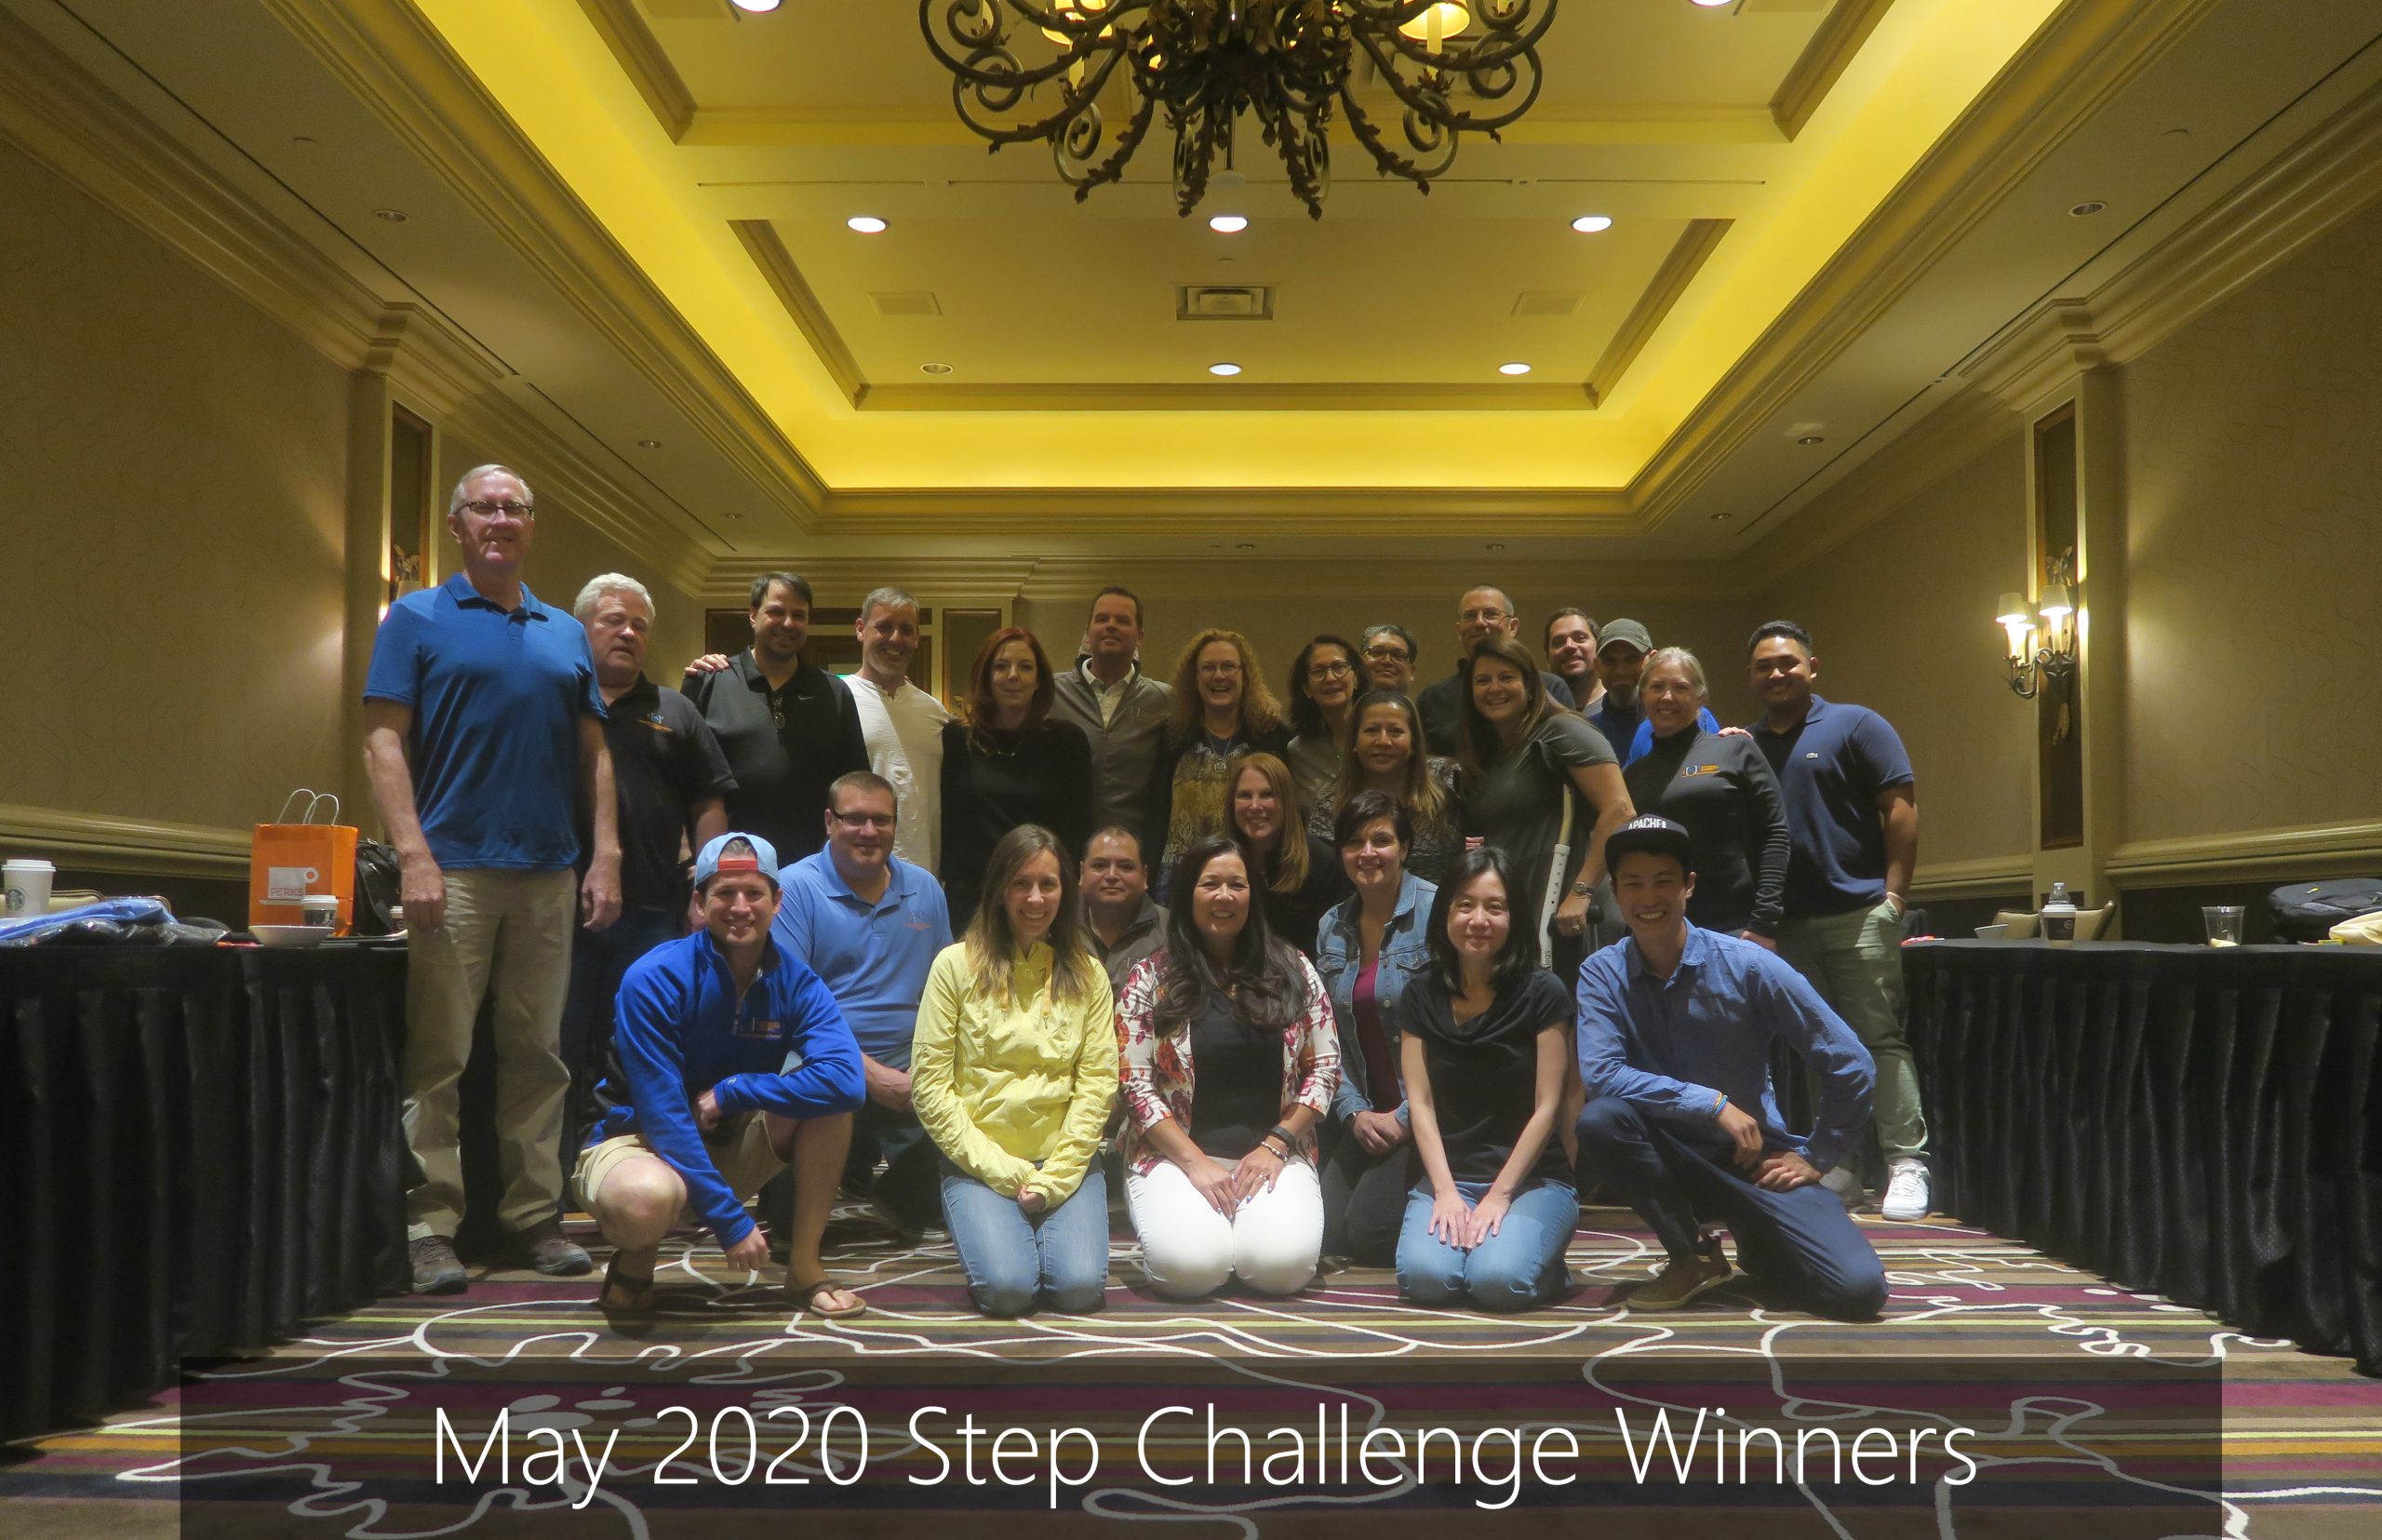 tmc-blog-may-2020-step-challenge-winners-featured-image